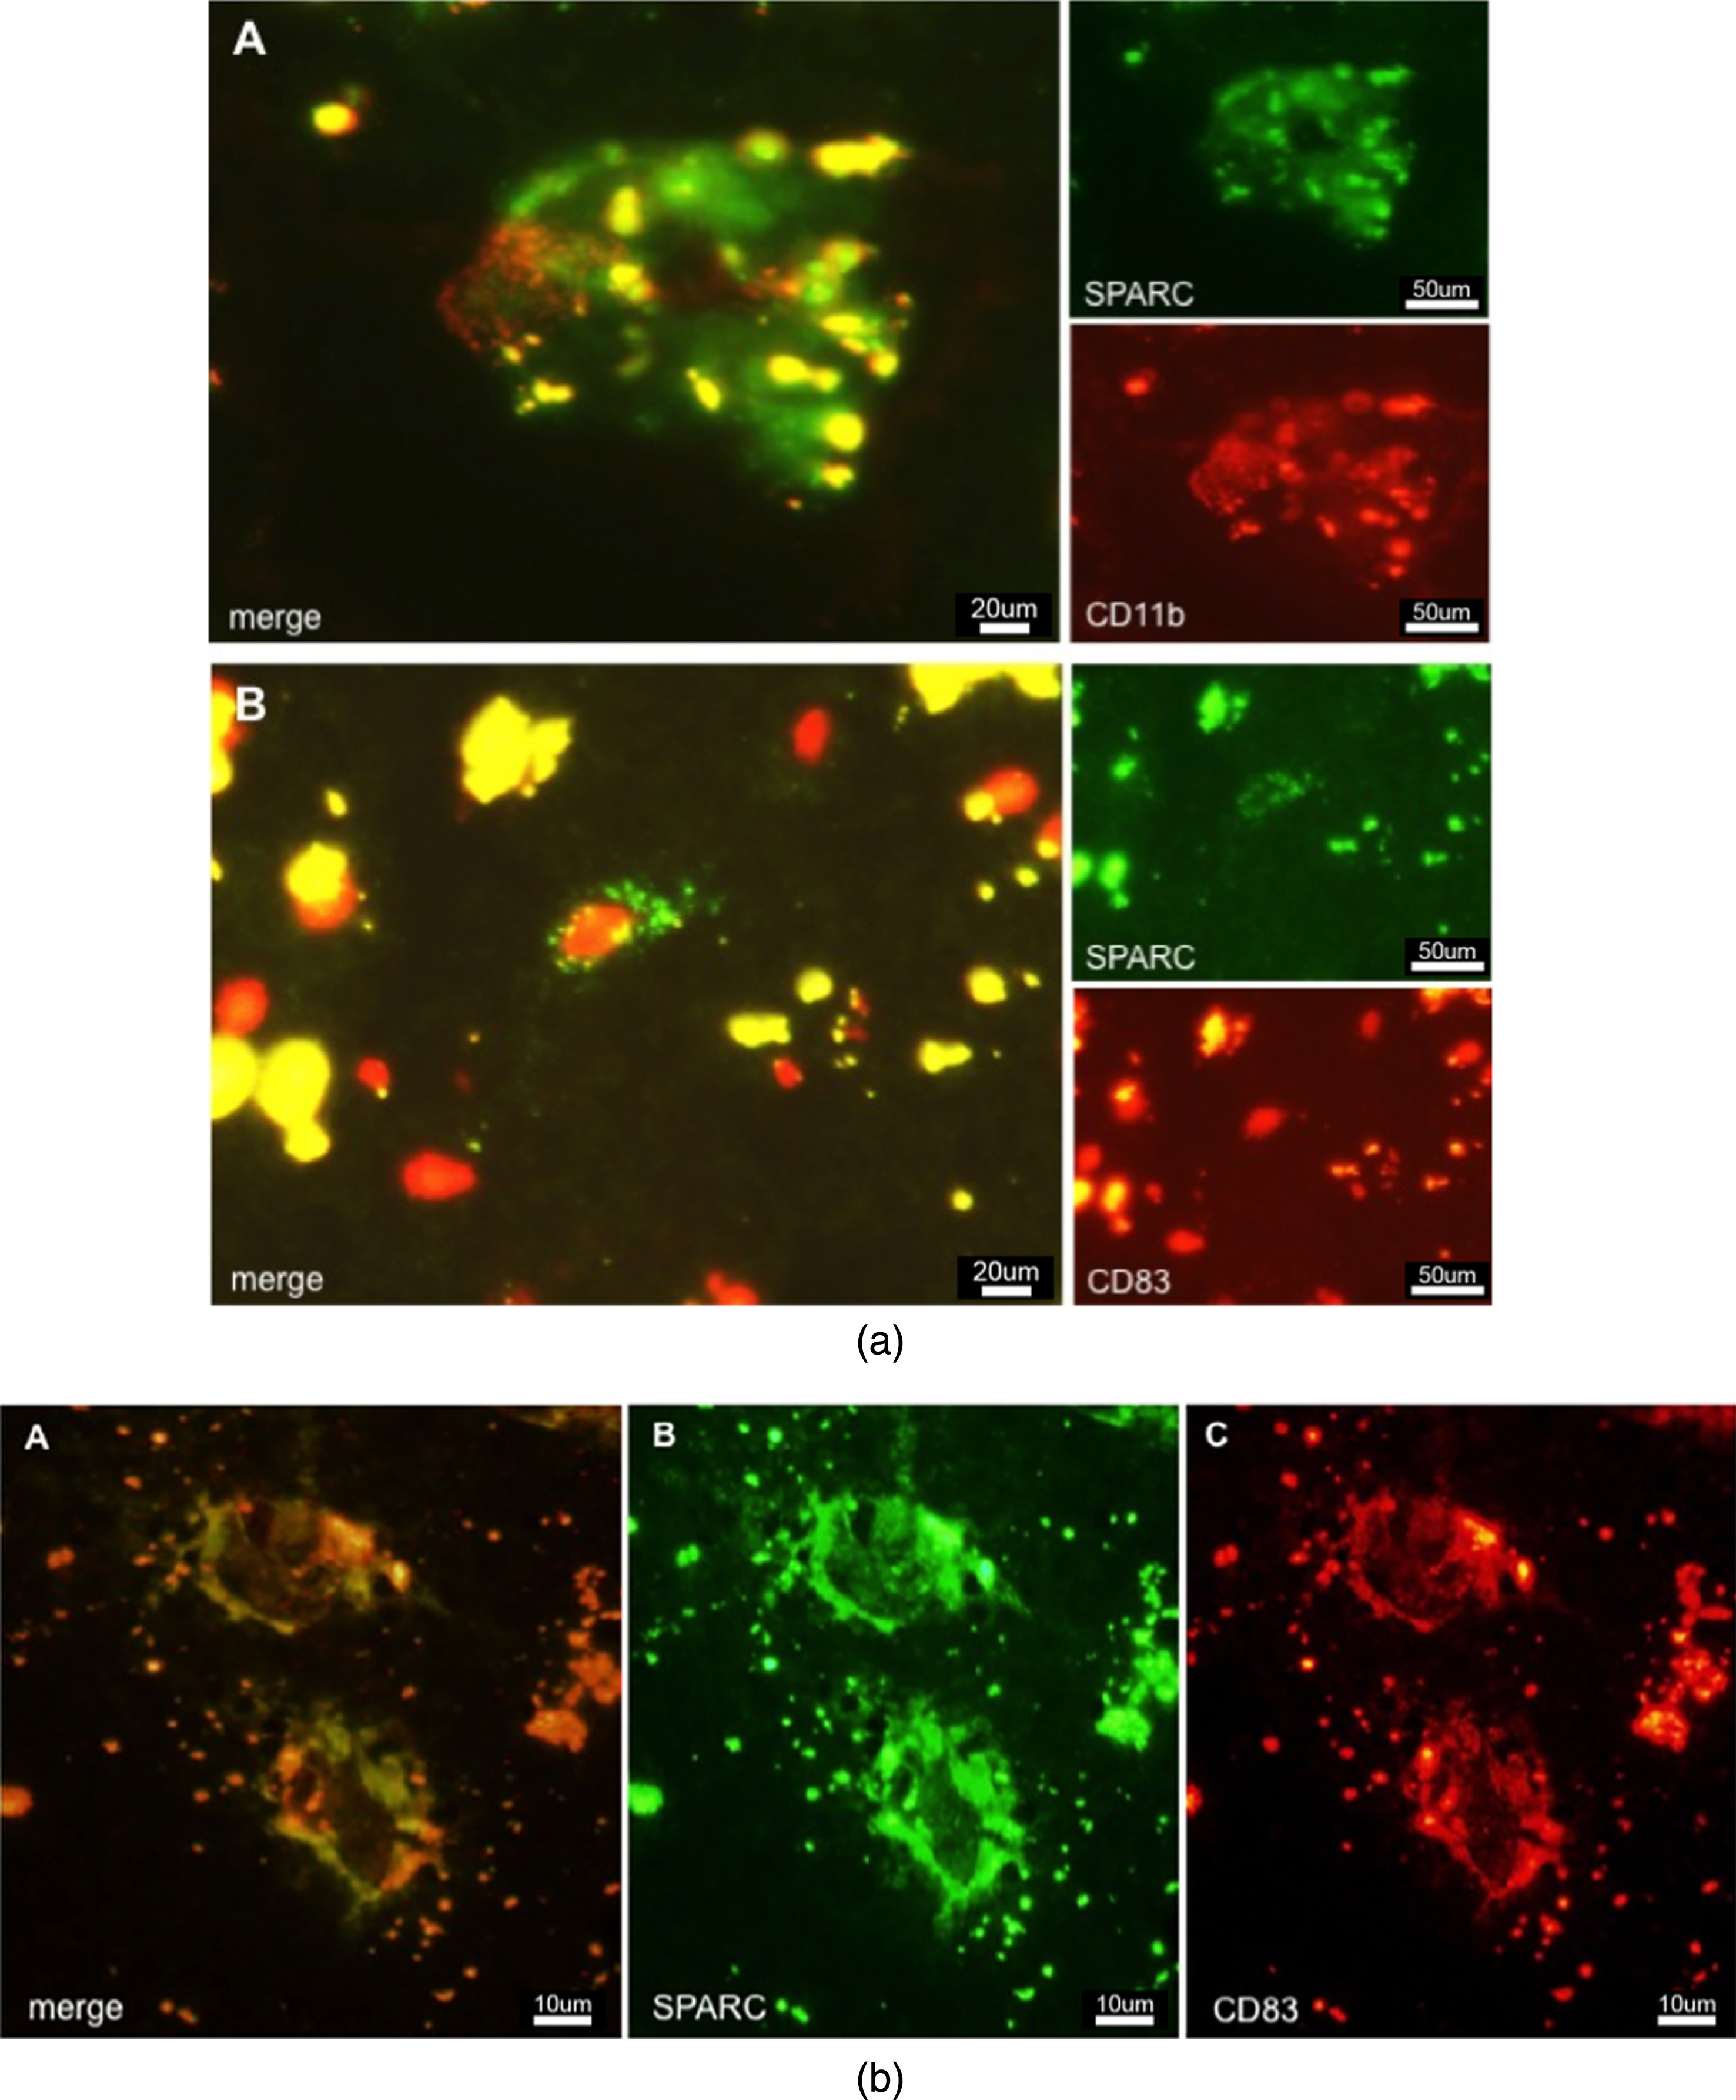 a) Immunostaining of SPARC positive cells in AD tissue. A: CD11b positive macrophages colocalized and associated with SPARC expression. B: CD83 positive cell expressing SPARC. b) Colocalization of SPARC and CD83, demonstrating the ability of dendritic cells to induce SPARC expression. This image shows the diseased state. Controls (not shown) do not exhibit such expression patterns.